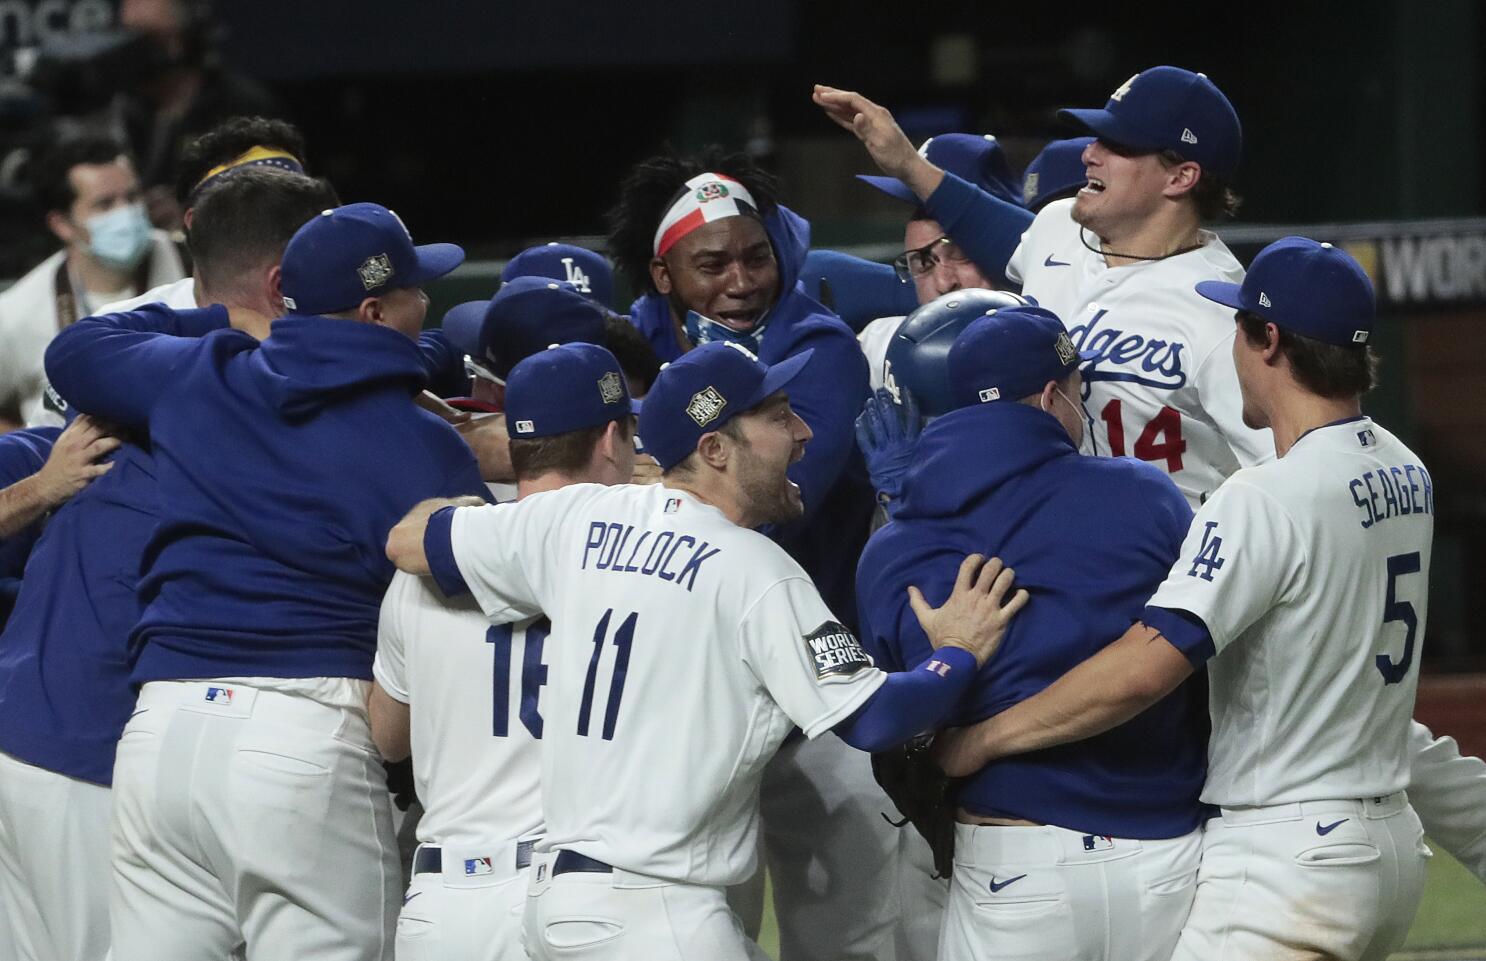 Dodgers' top stars deliver in rout of Rays in Game 1 of World Series